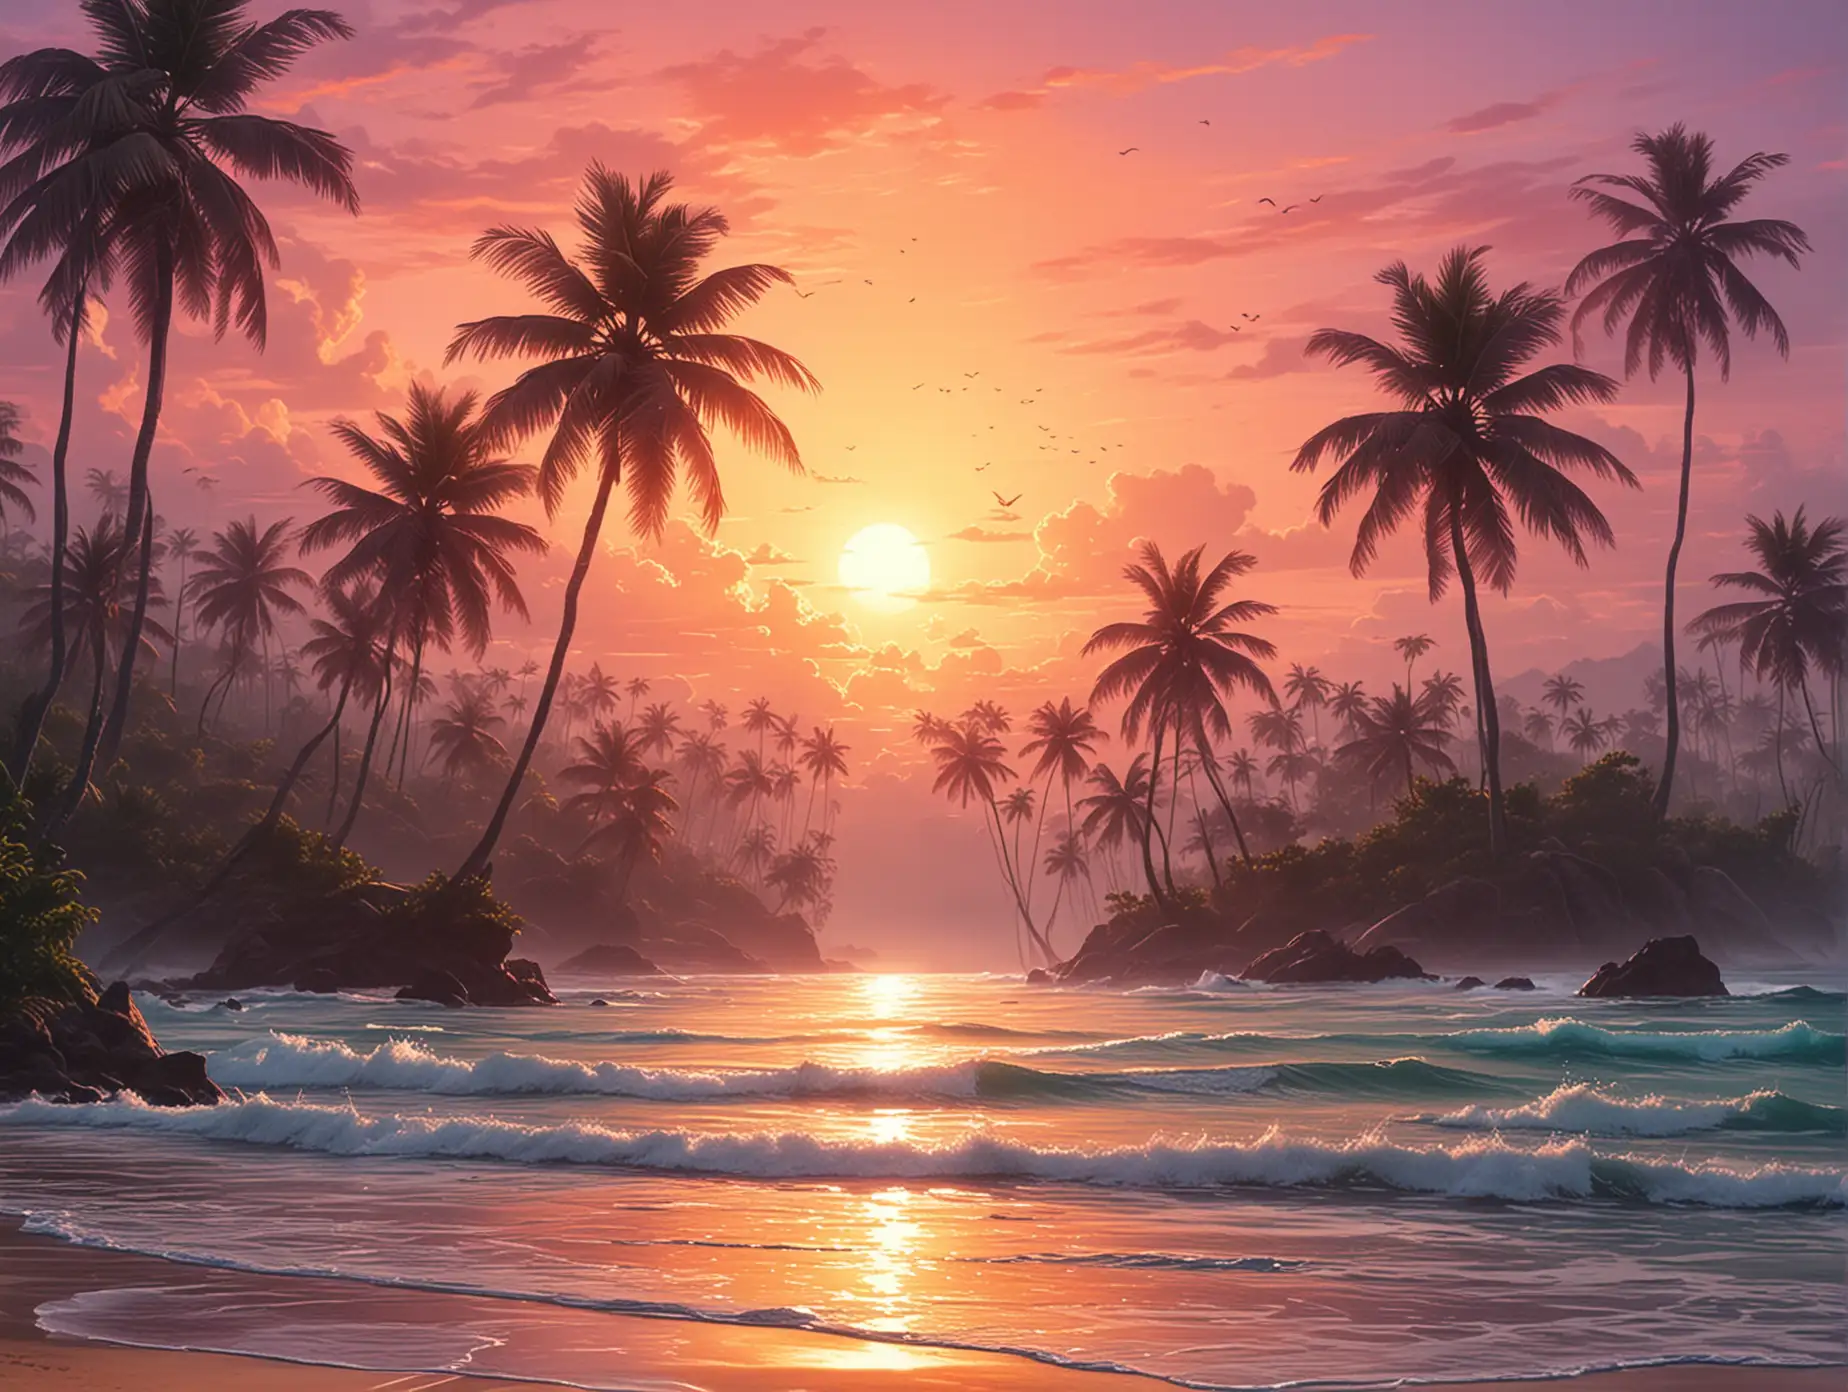 Vibrant Tropical Sunrise Landscape with Palm Trees and Ocean Waves